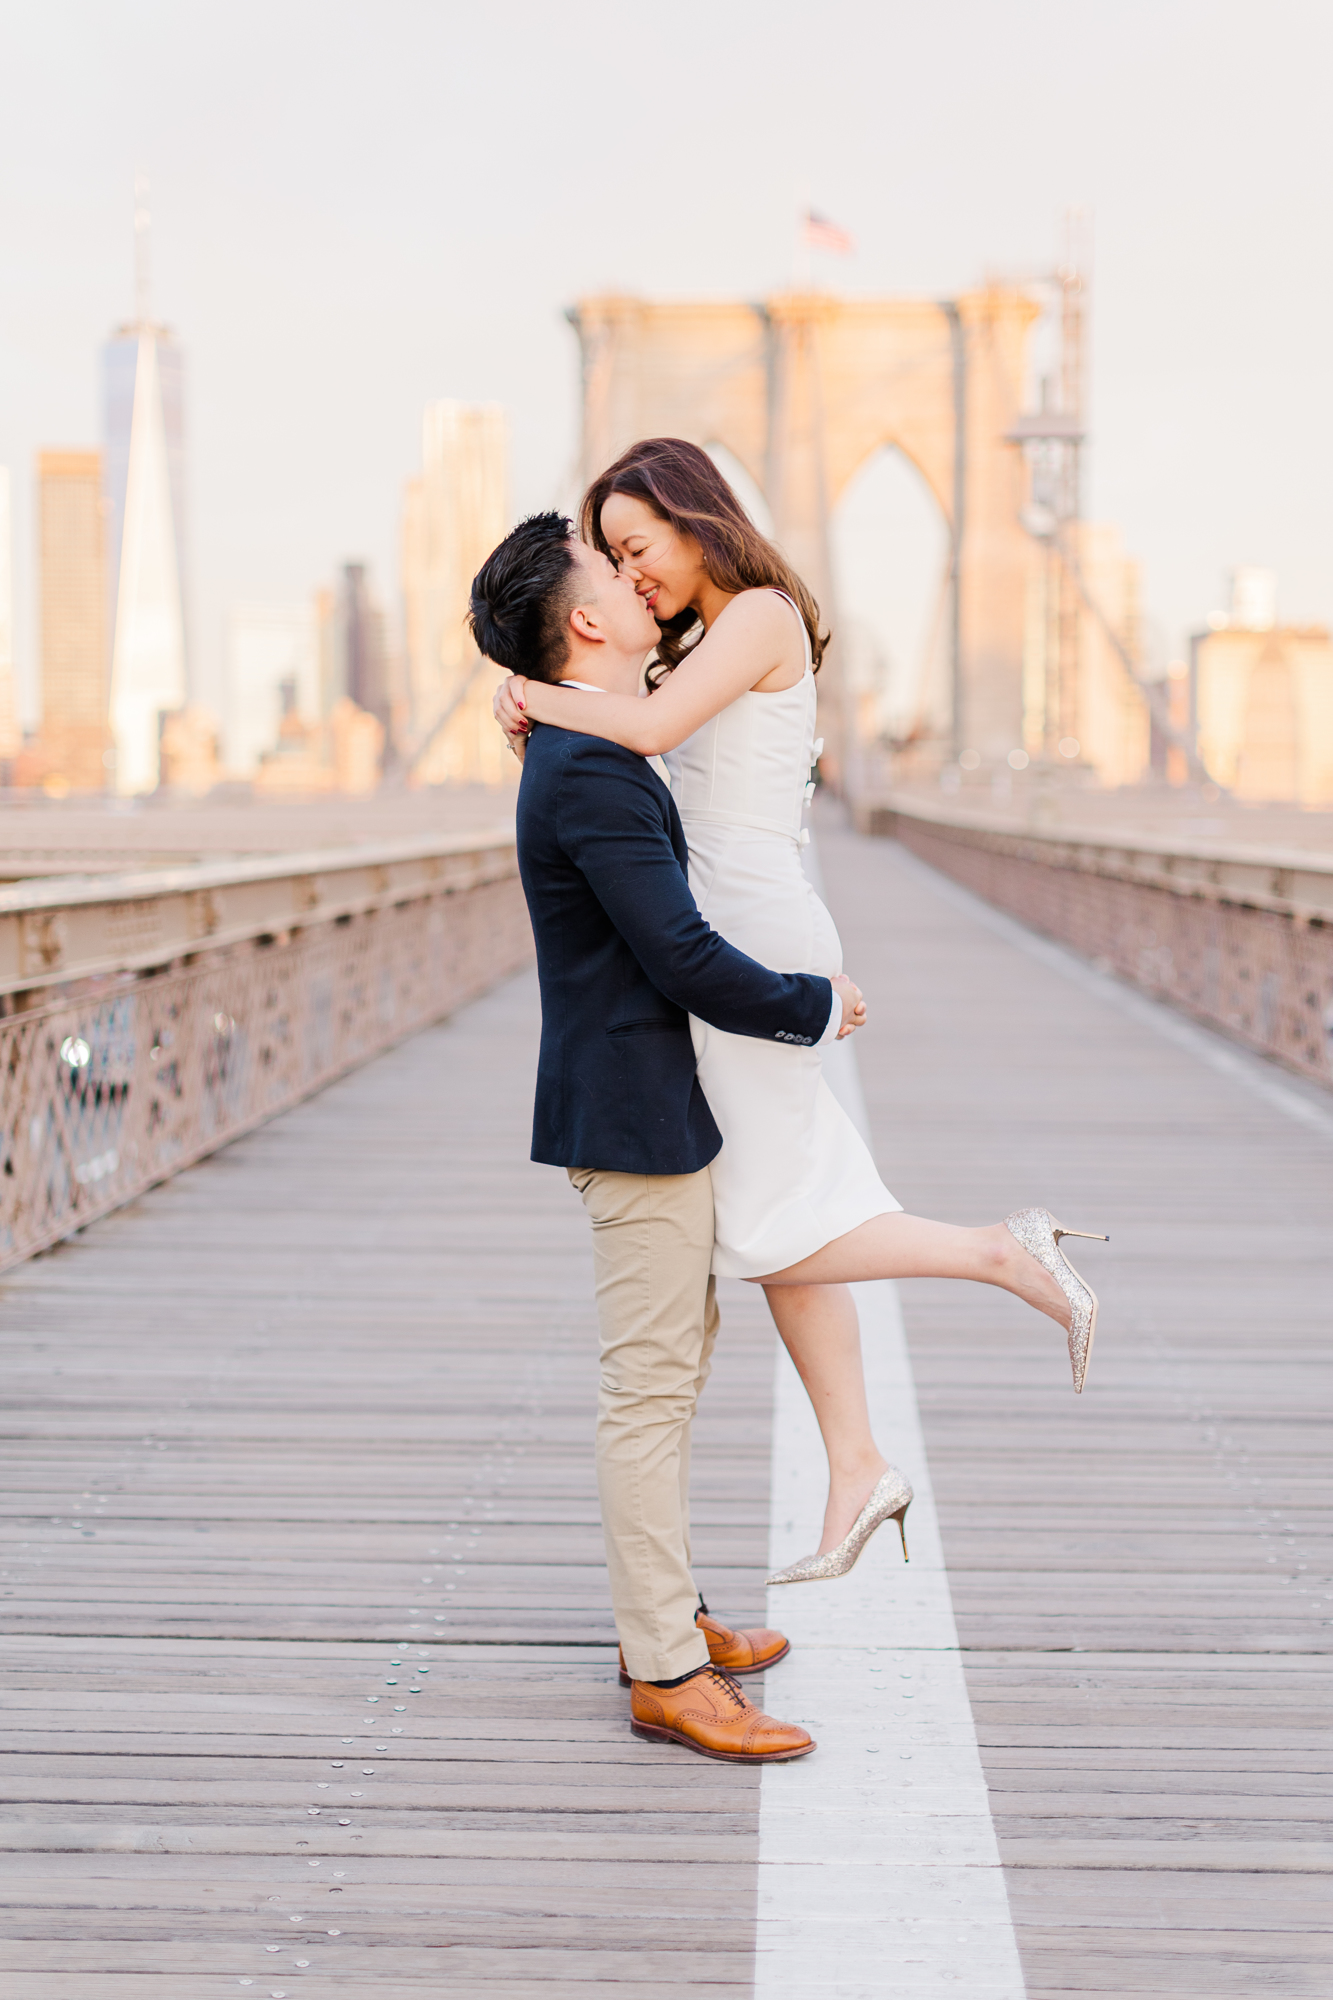 The Best Time of Year for Bright DUMBO Engagement Photos